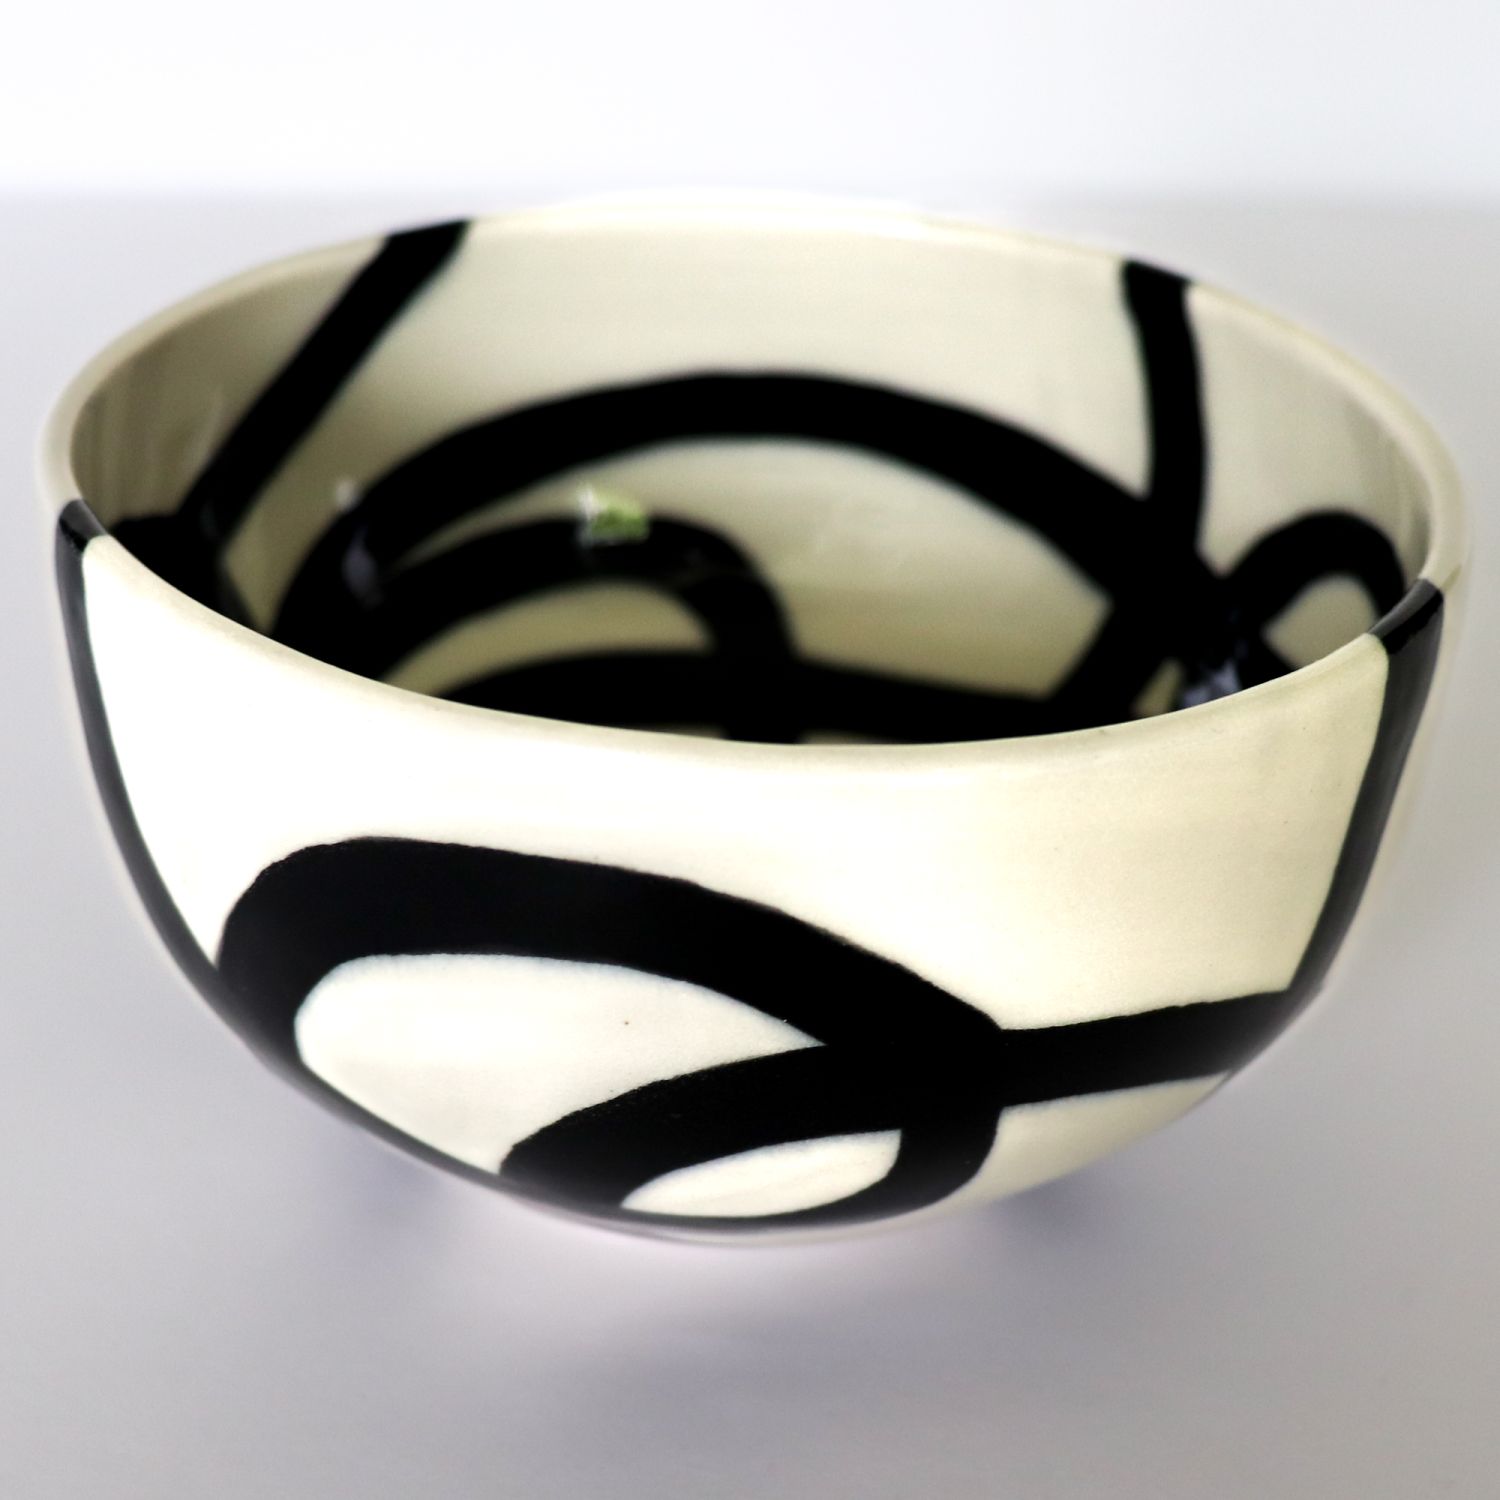 Alana Marcoccia: Interconnected Nesting Bowl – Small Product Image 1 of 9